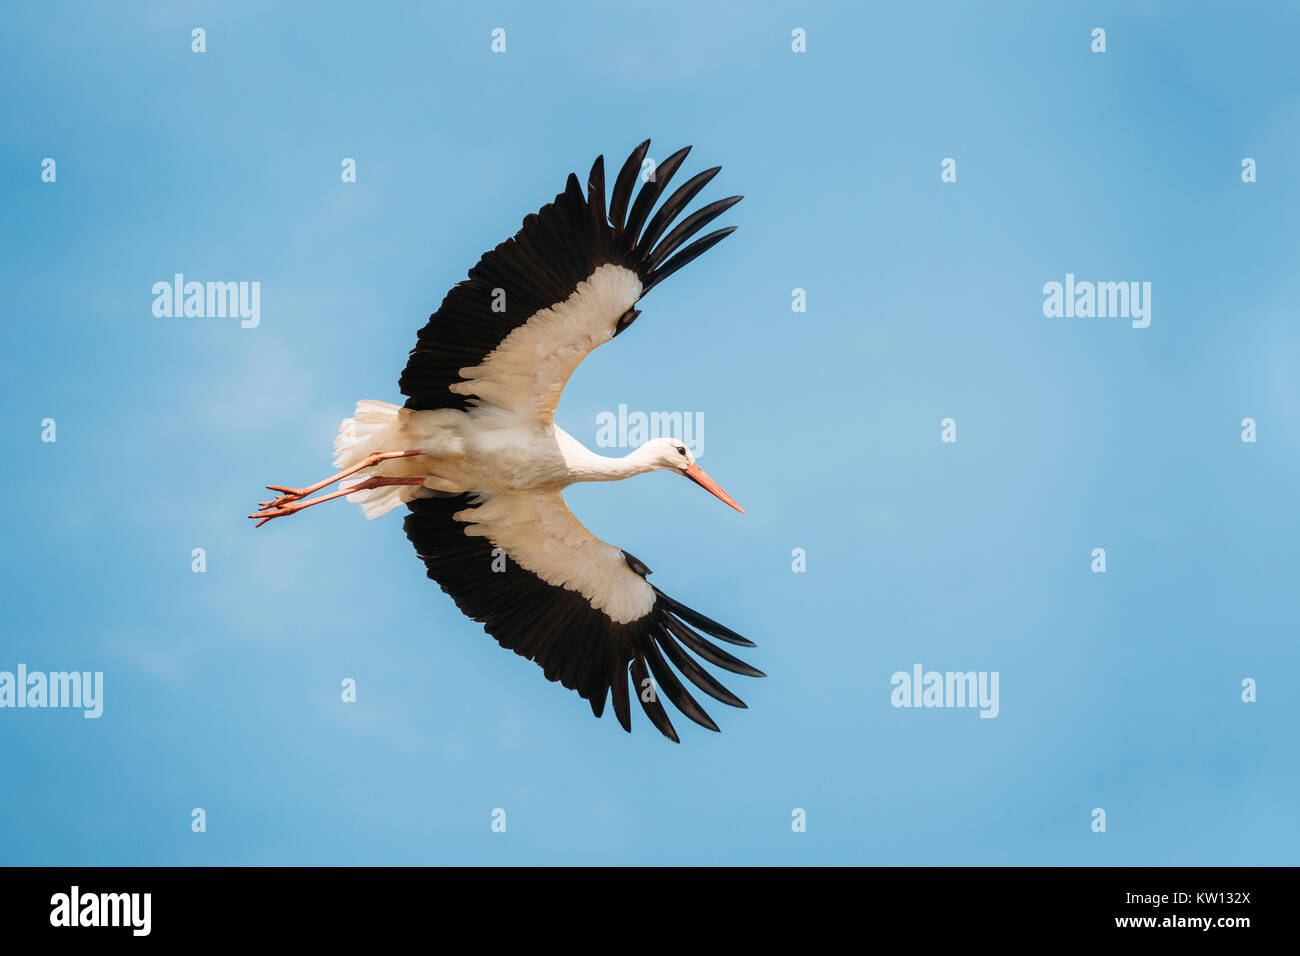 Adult European White Stork Flies In Blue Sky With Its Wings Spread Out. Stock Photo